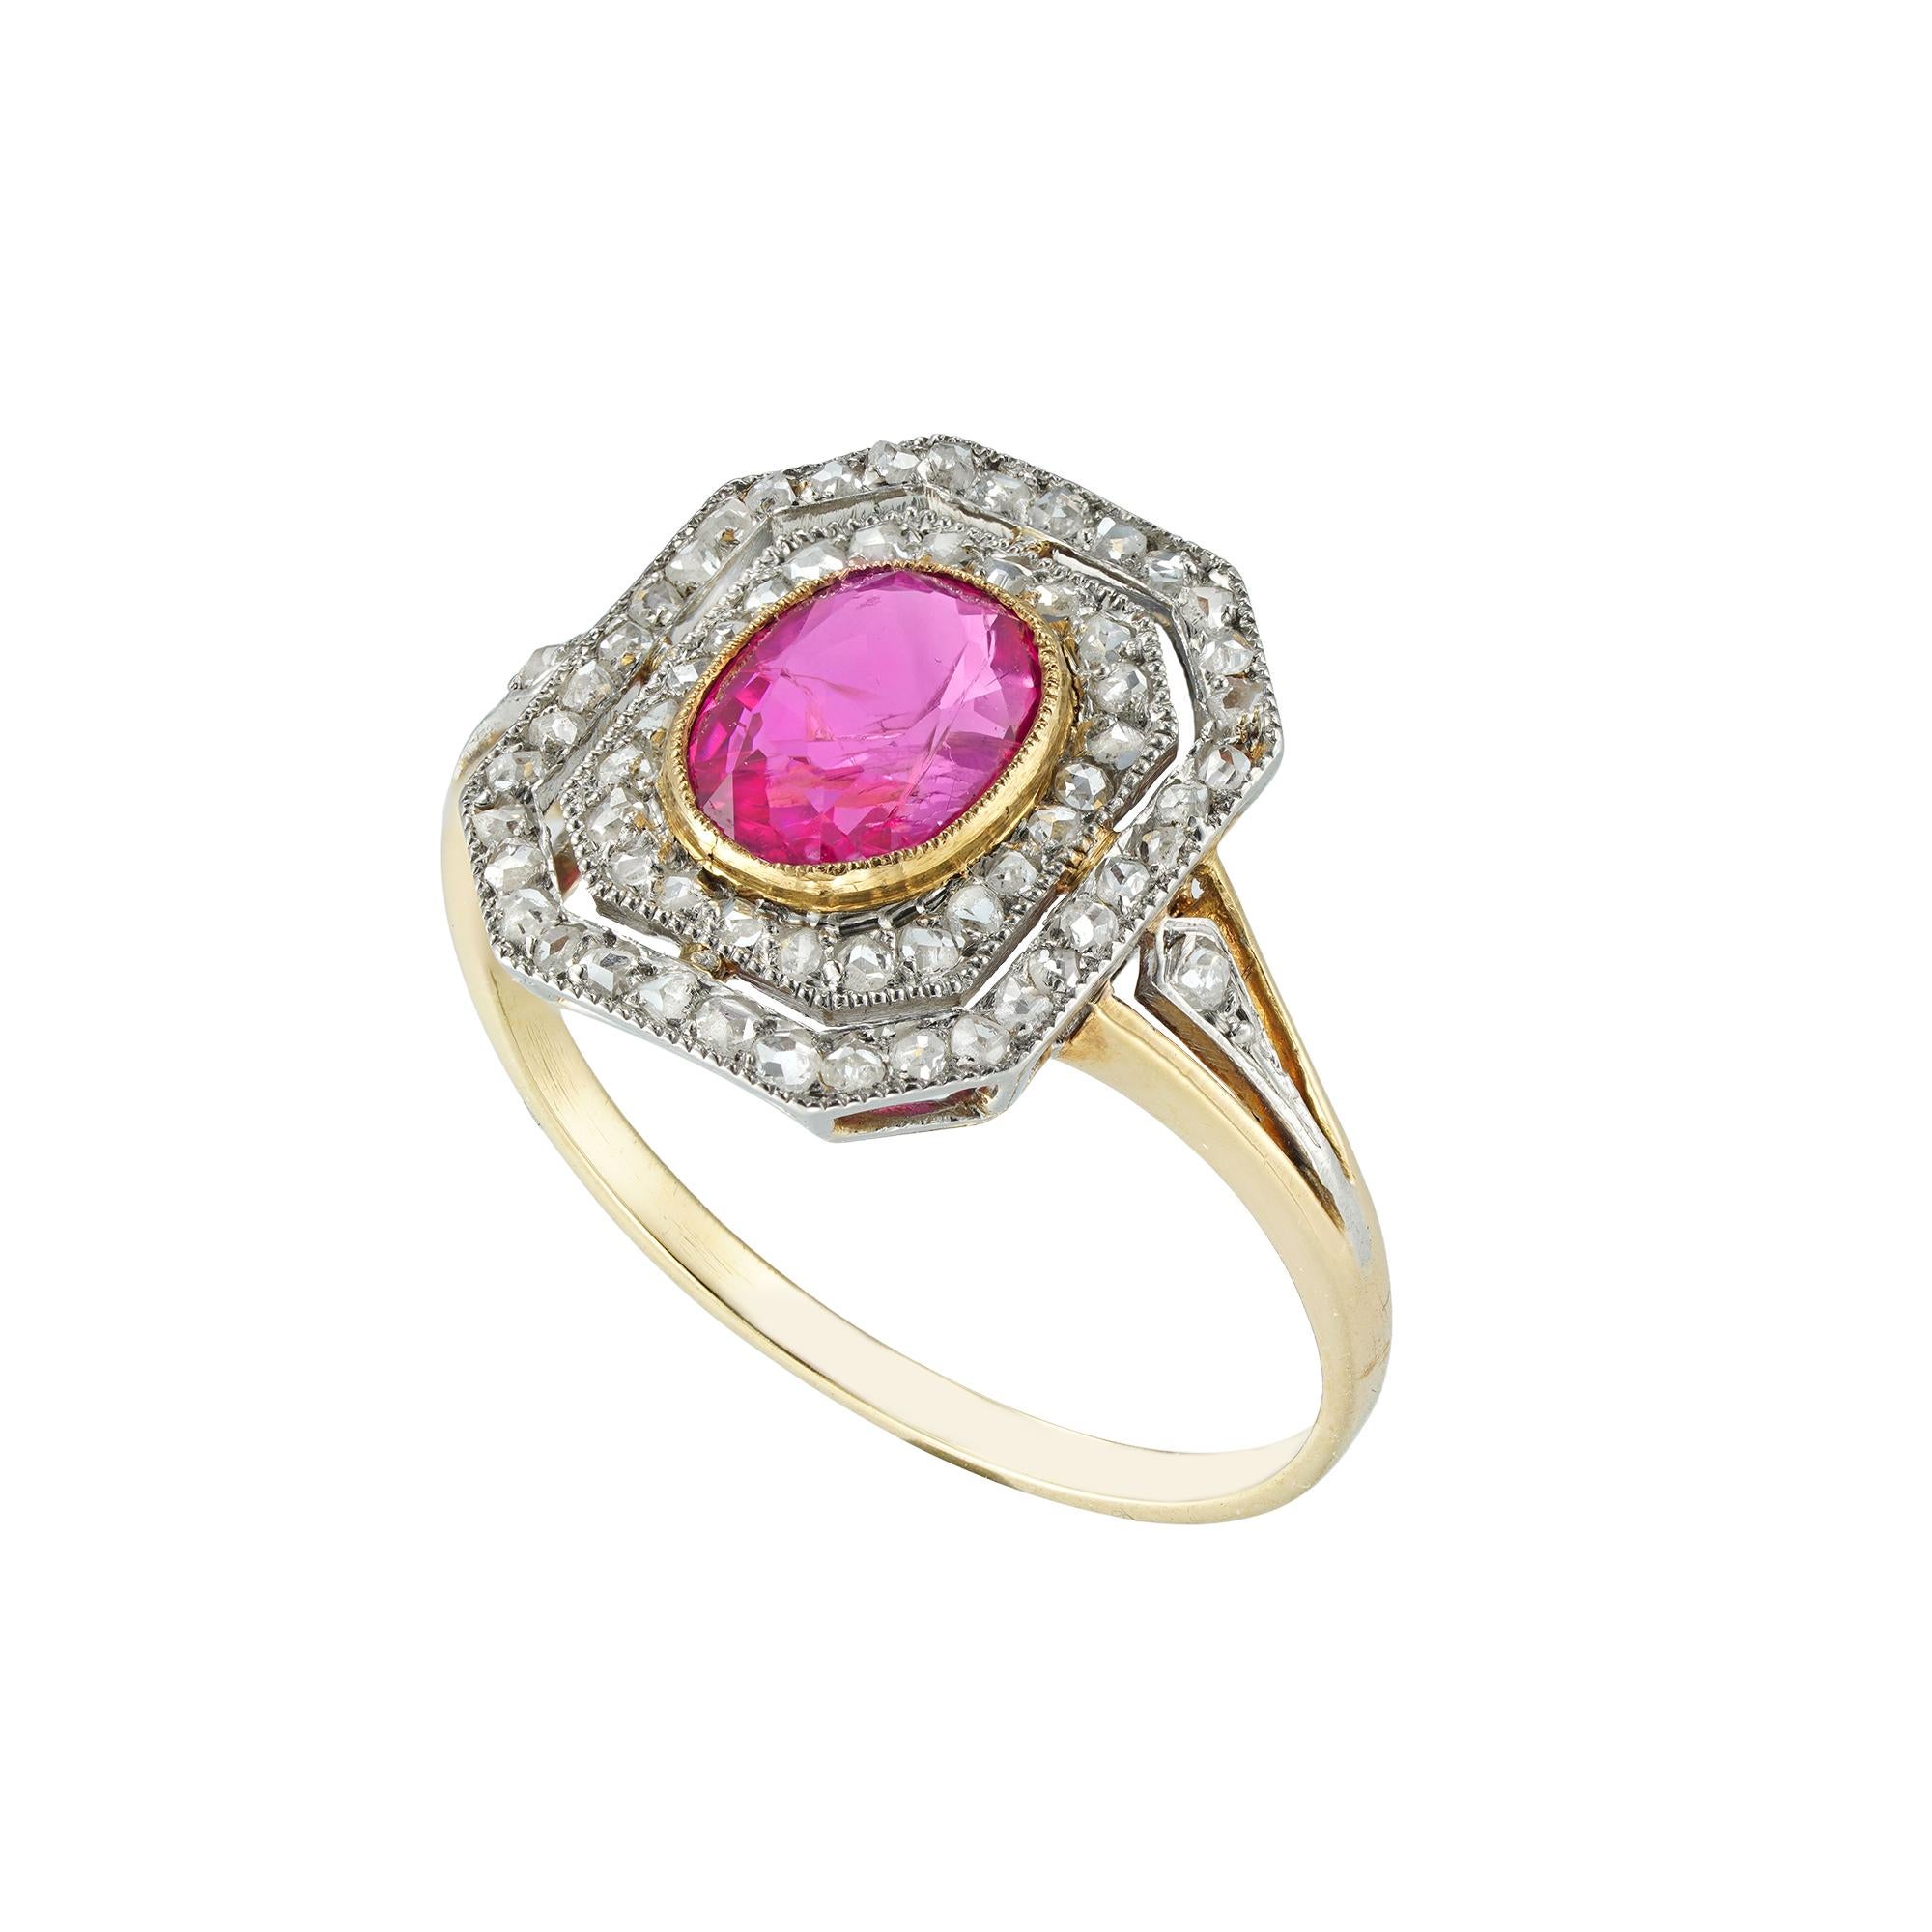 A ruby and diamond tablet cluster ring, the oval ruby measuring approximately 7.2 x 5.6mm, estimated to weigh 1.2 carats, in a gold millegrain setting surrounded by a double border of rose-cut diamonds with a daylight in-between to a platinum mount